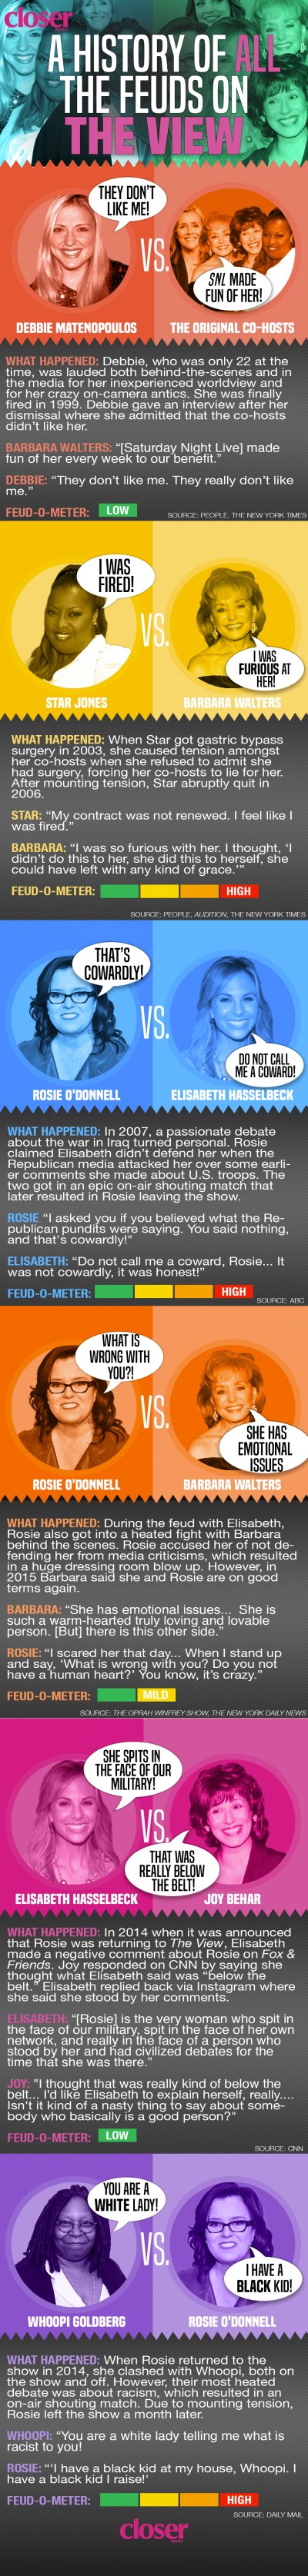 the view cast infographic feuds